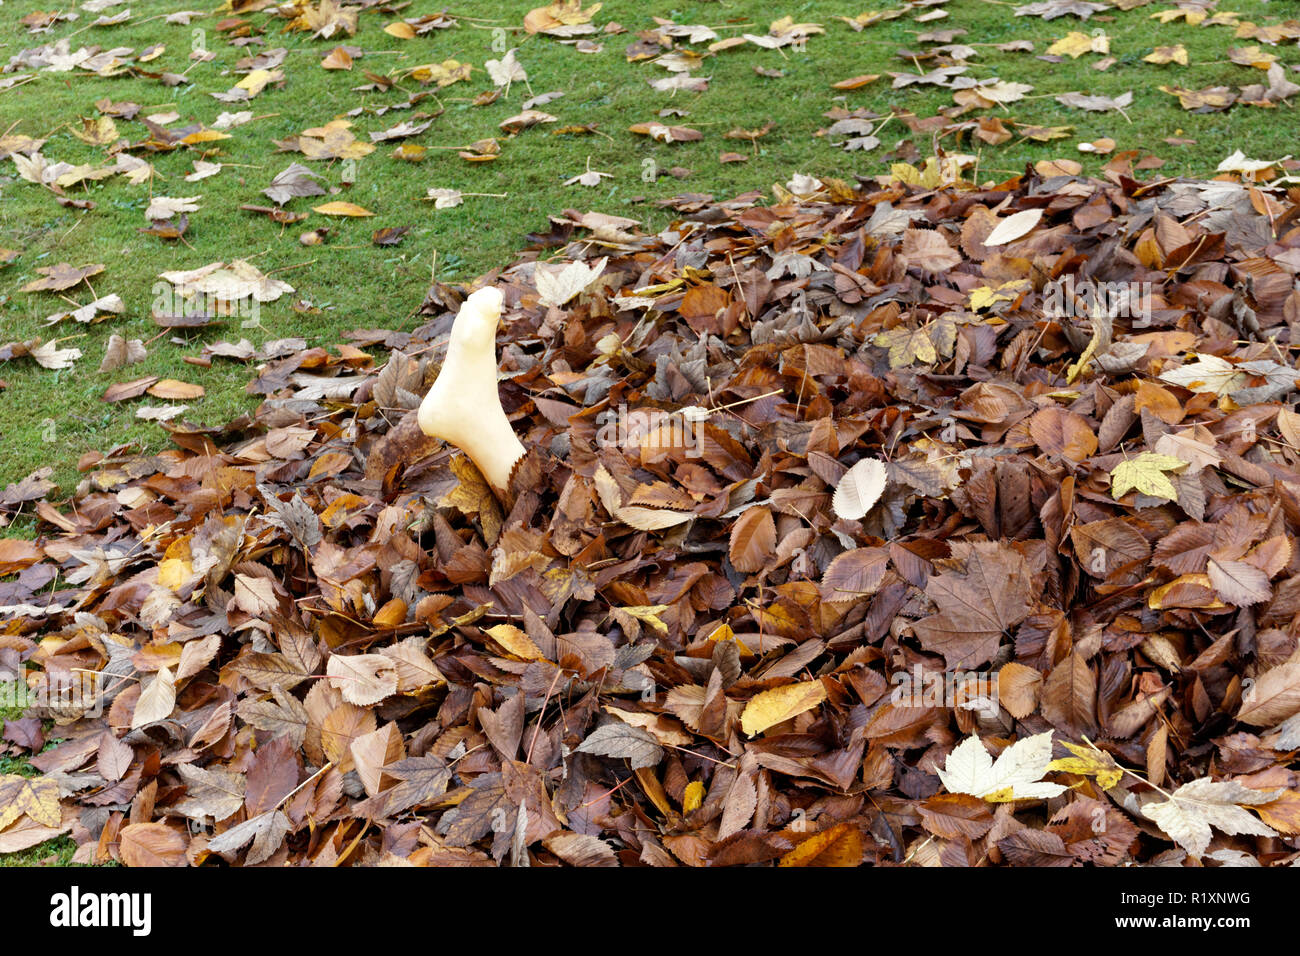 Gruesome Halloween decoration of a plastic human foot protruding from a pile of autumn leaves Stock Photo